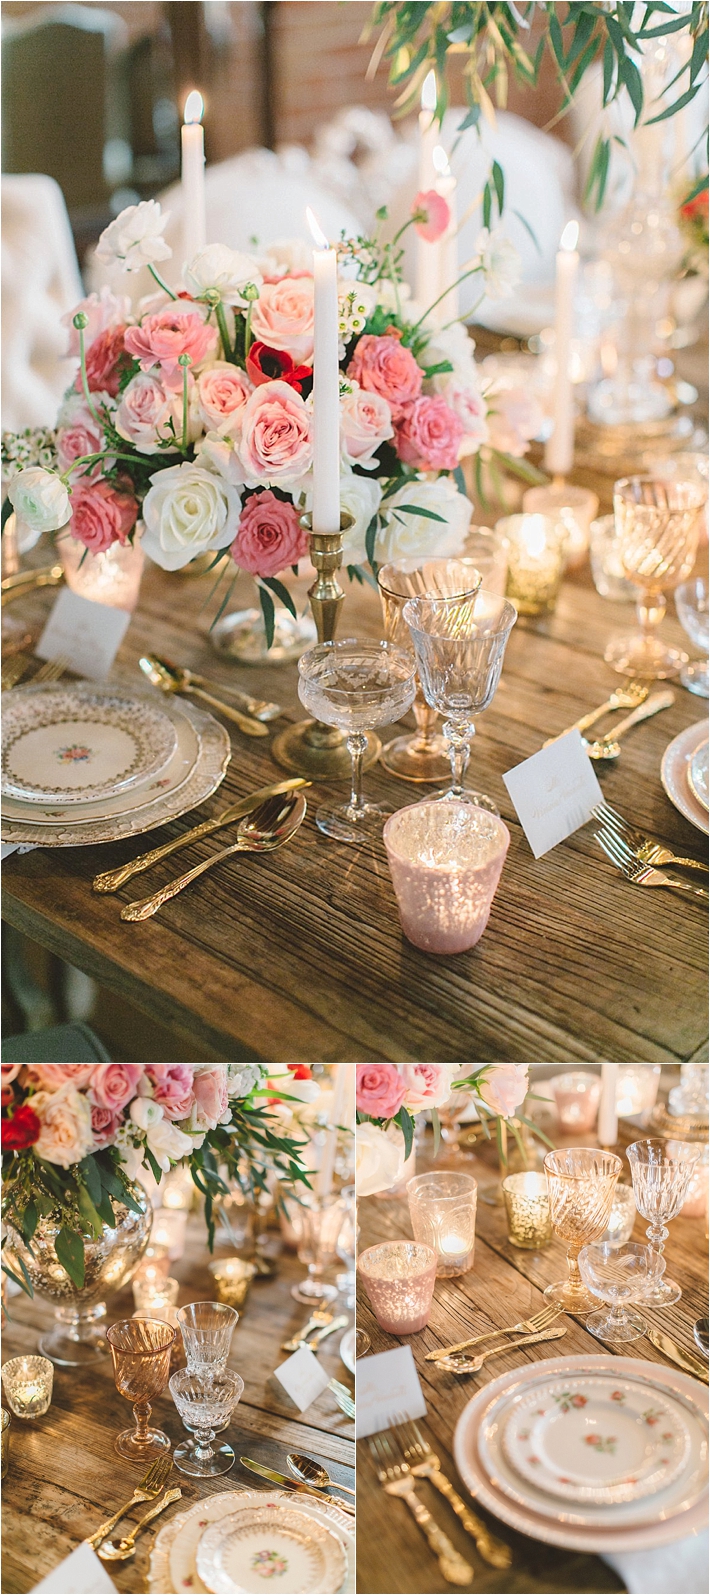 Romantic pink and white centerpiece with candles